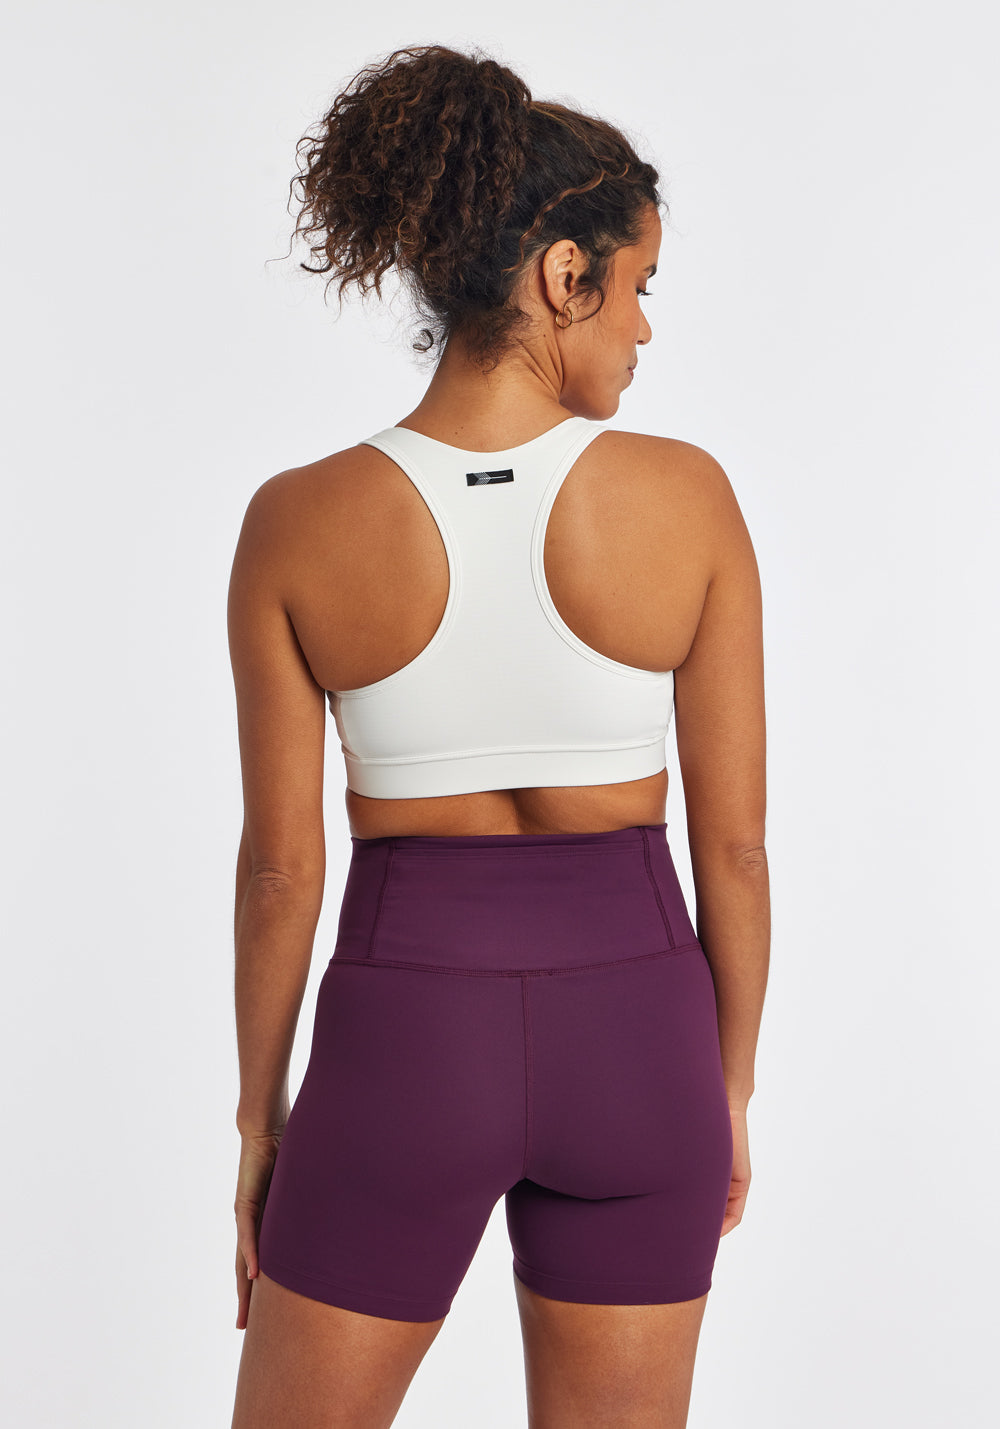 This sports bra is amazing from @Stella Leah !! Its super comfortable